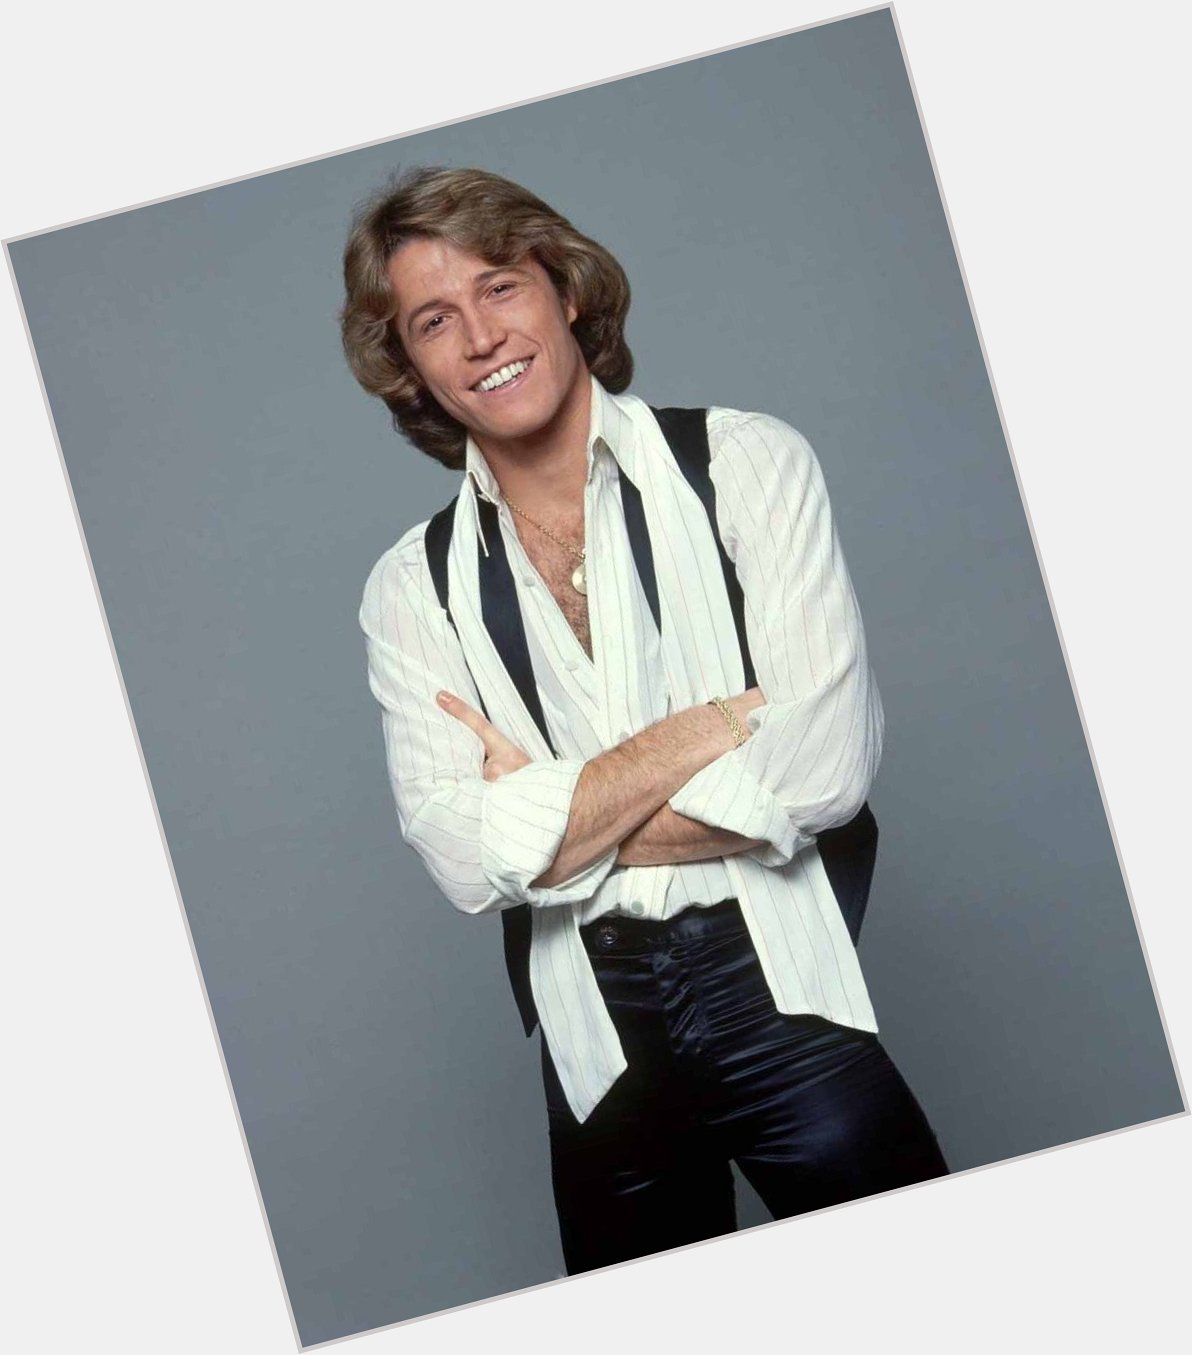 Happy Birthday to Andy Gibb, who would have turned 59 today! 